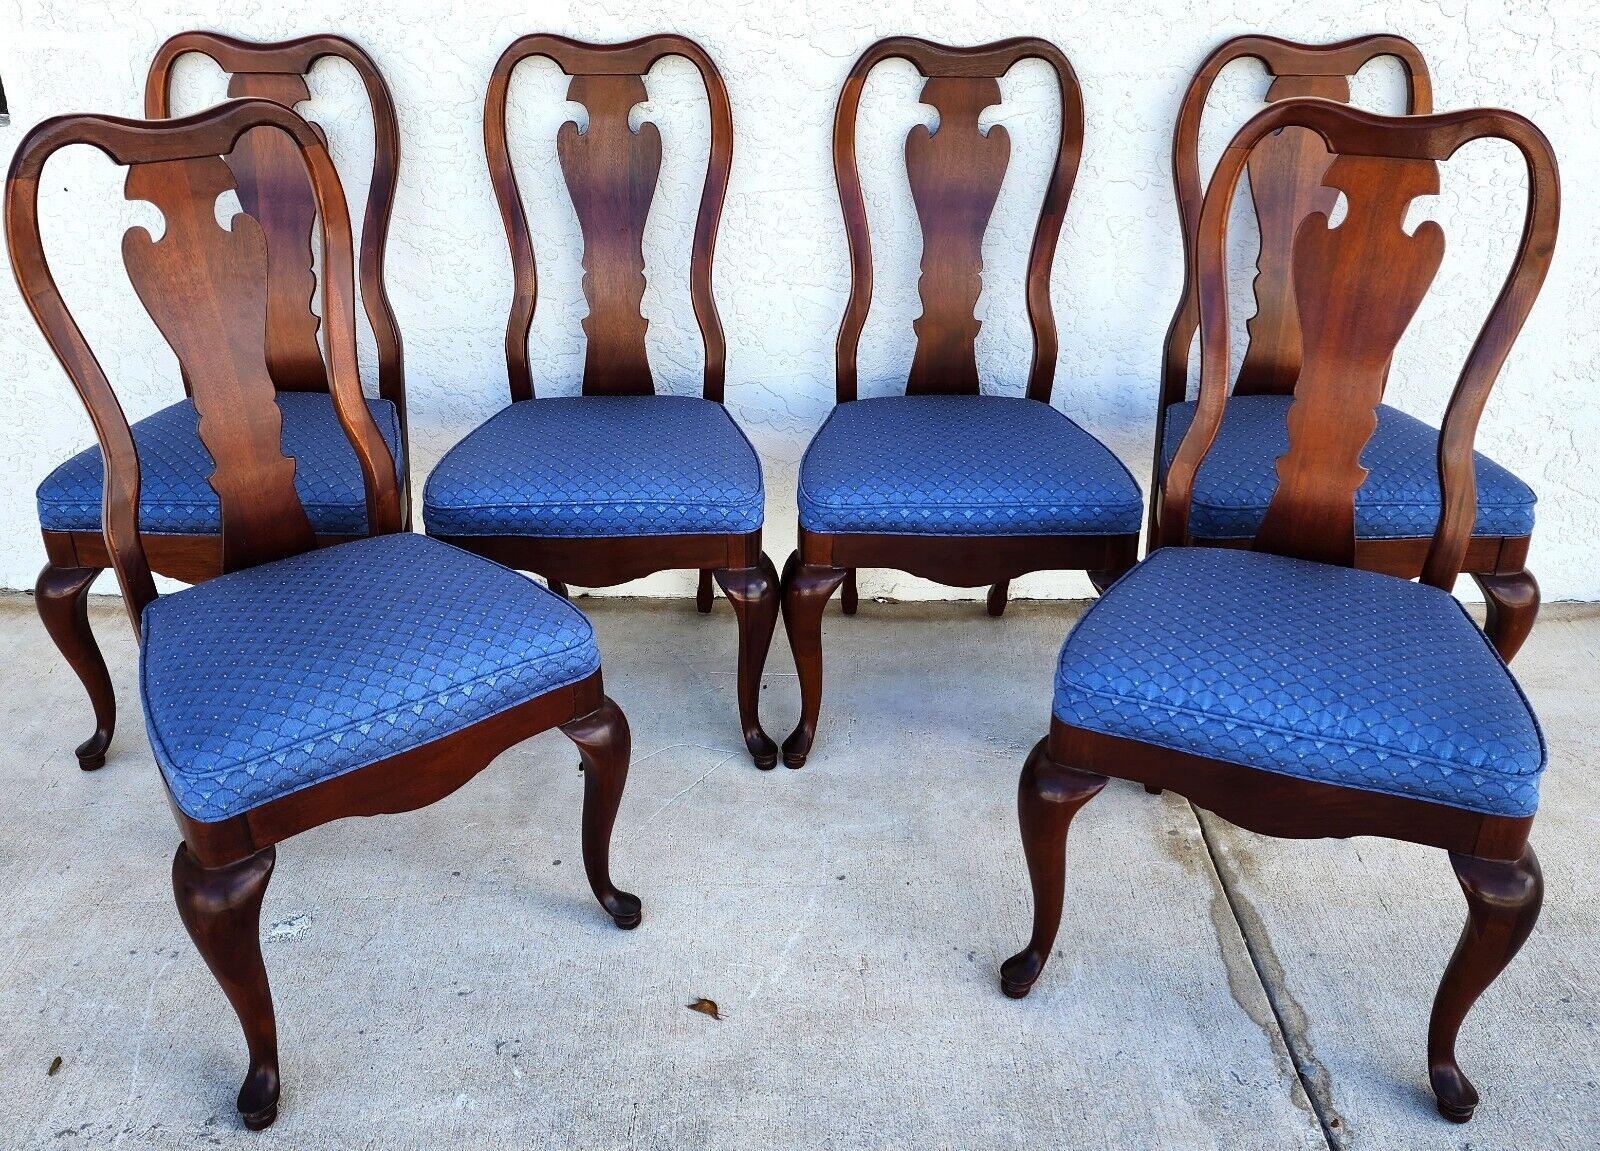 Offering one of our recent Palm Beach Estate Fine Furniture Acquisitions of A 
Set of 6 Vintage Queen Anne mahogany dining chairs 

Approximate Measurements in Inches
40